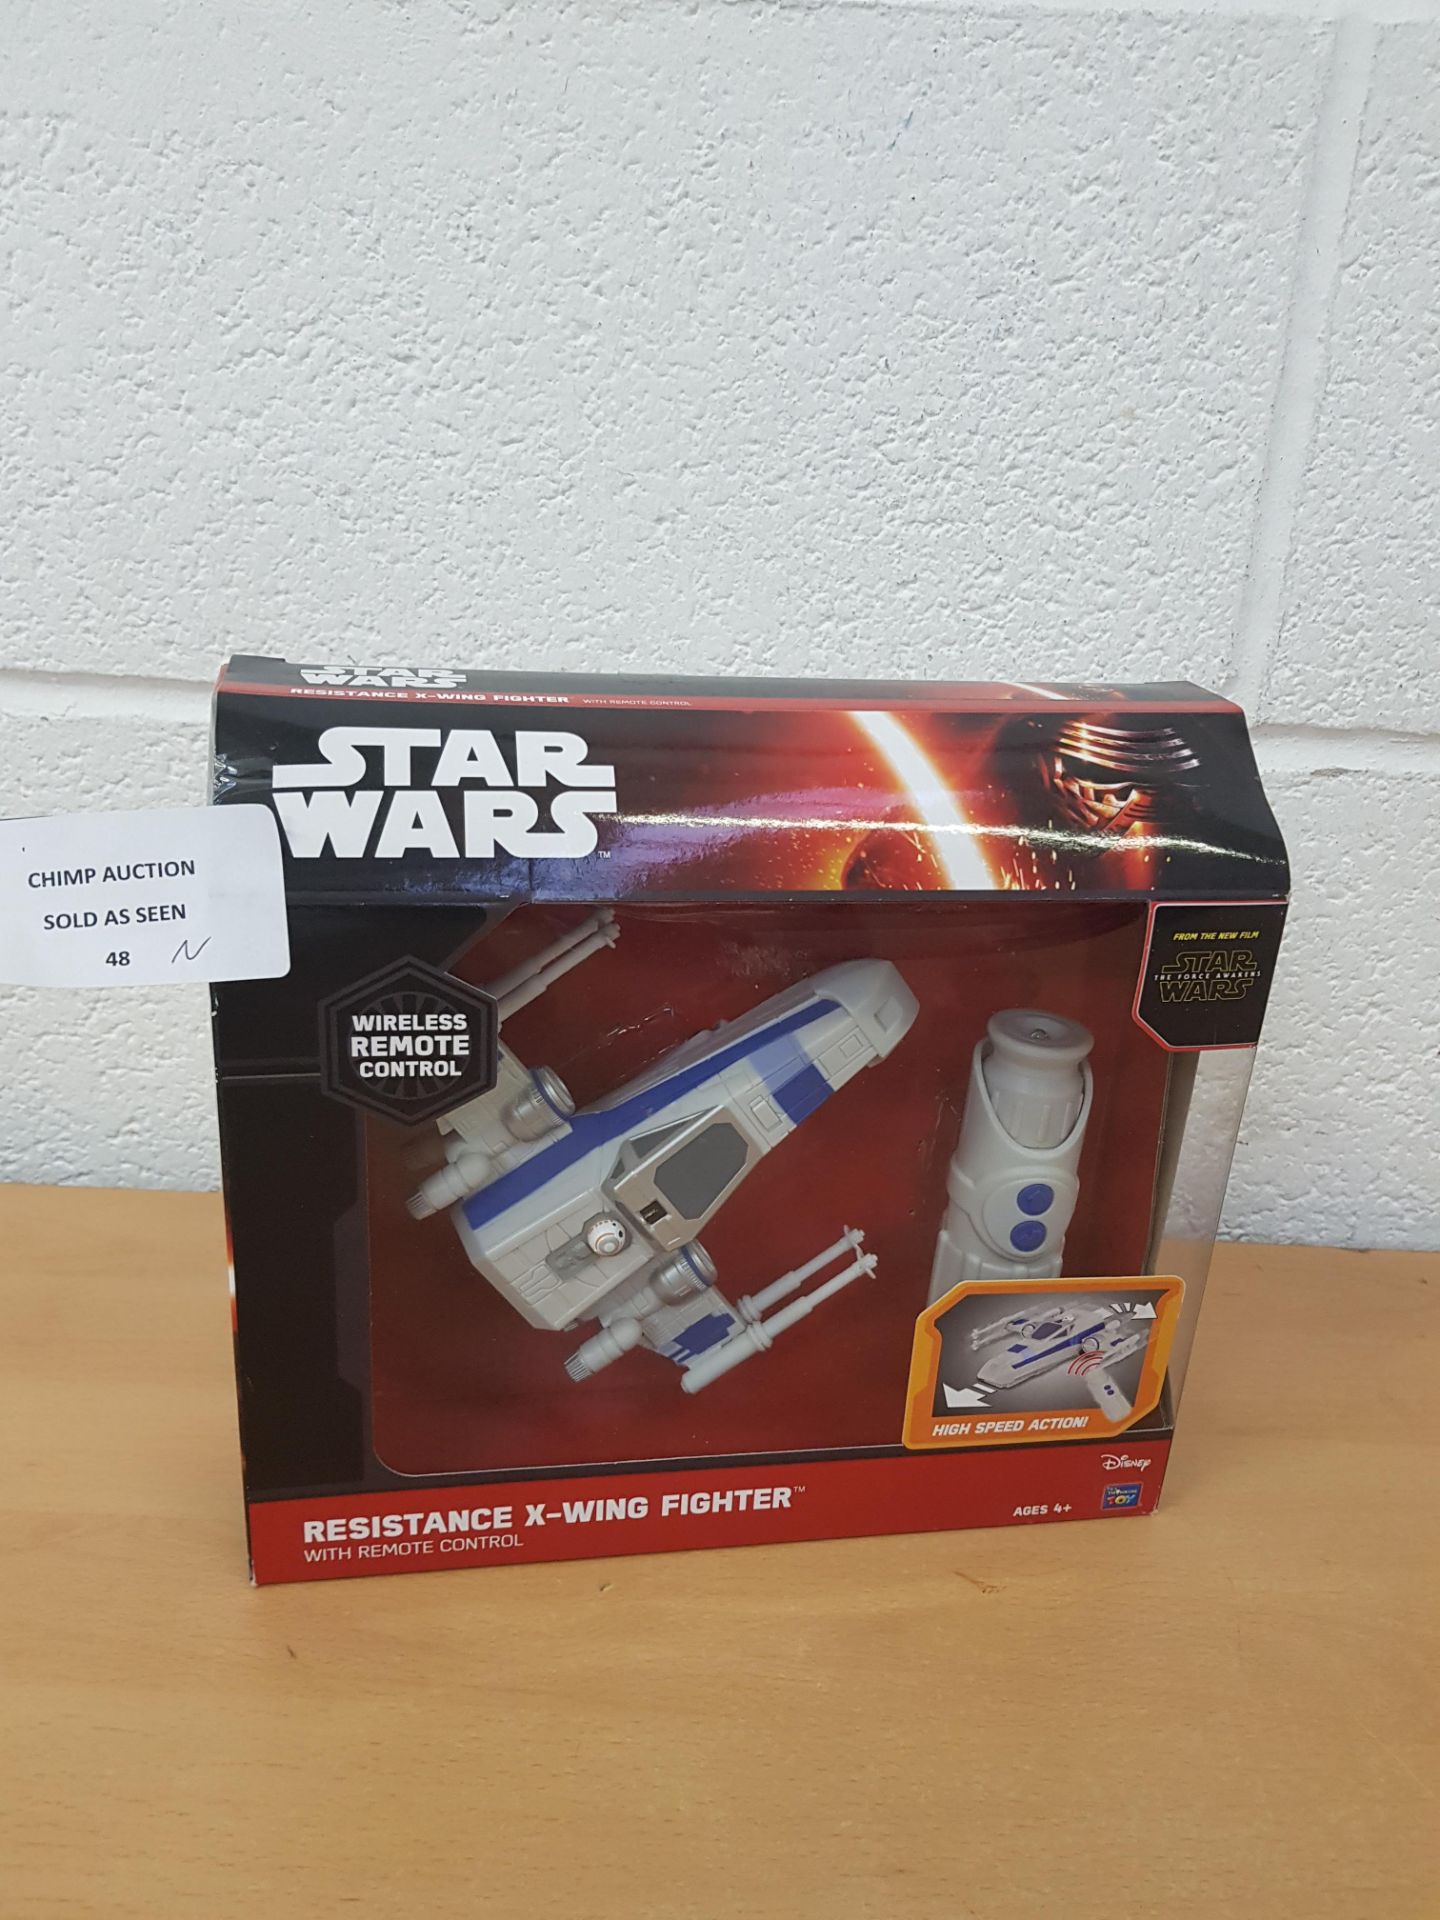 Brand new Star Wars Resistance X-Wing Fighter + wireless remote